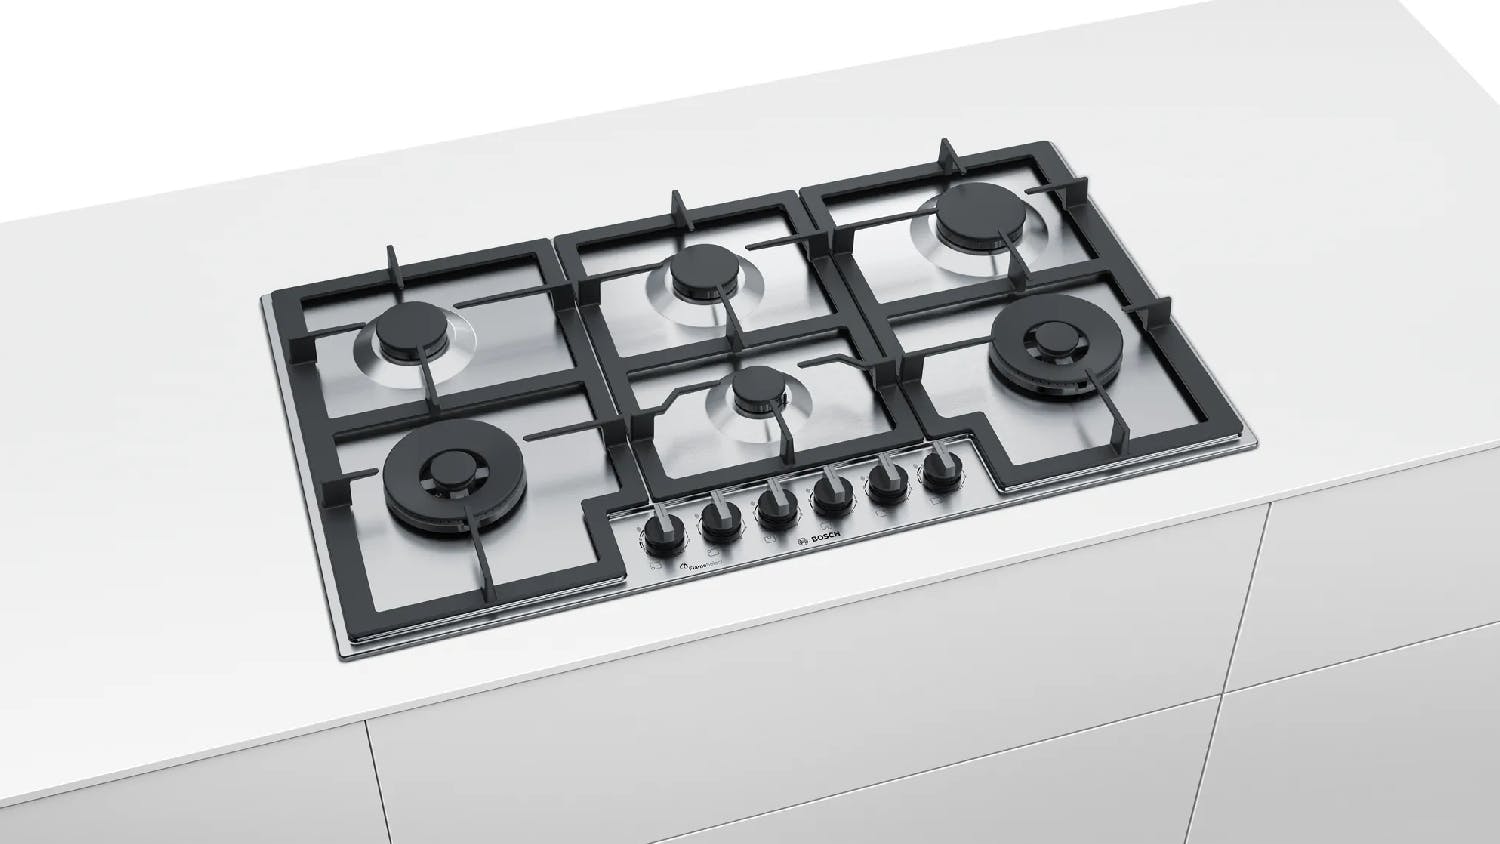 Bosch 90cm 6 Burner Gas on Steel Cooktop - Stainless Steel (Series 6/PCT9A5B90A)